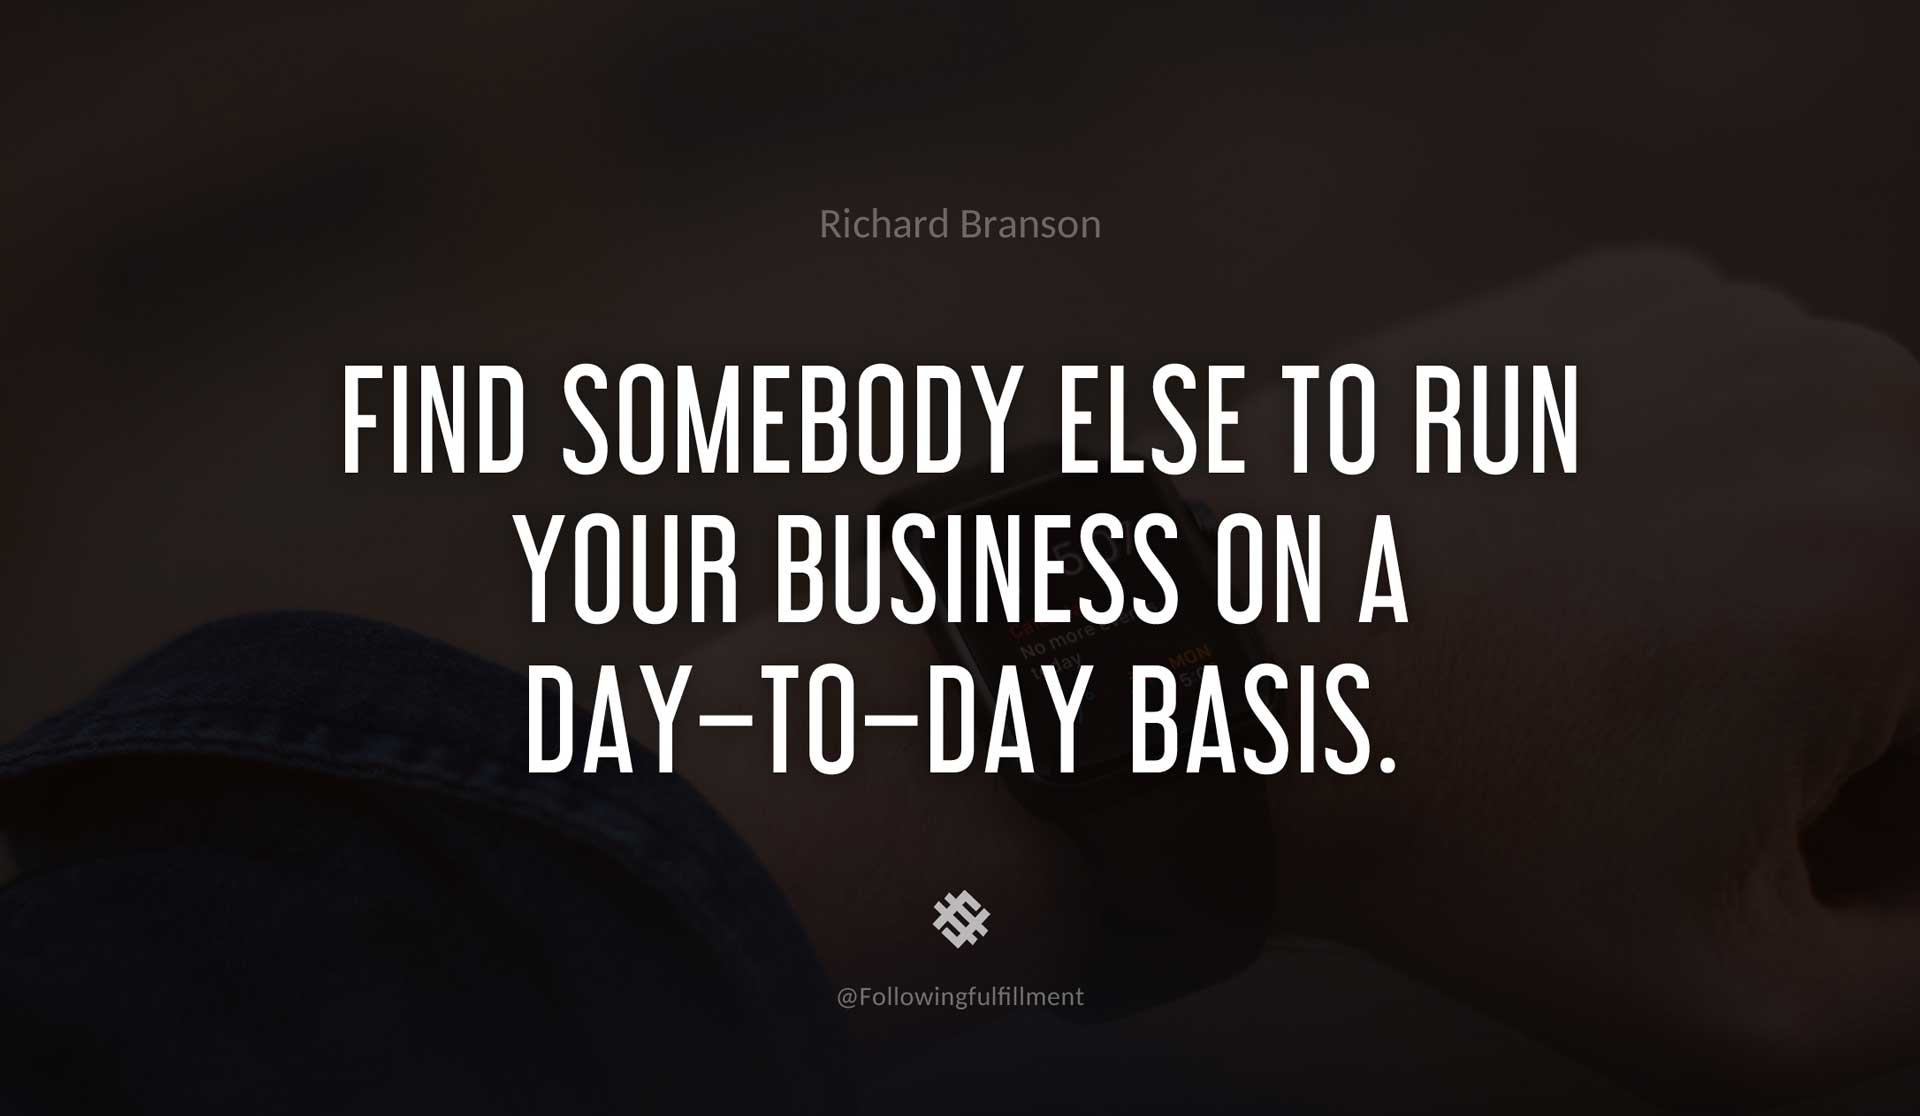 Find-somebody-else-to-run-your-business-on-a-day-to-day-basis.--RICHARD-BRANSON-Quote.jpg